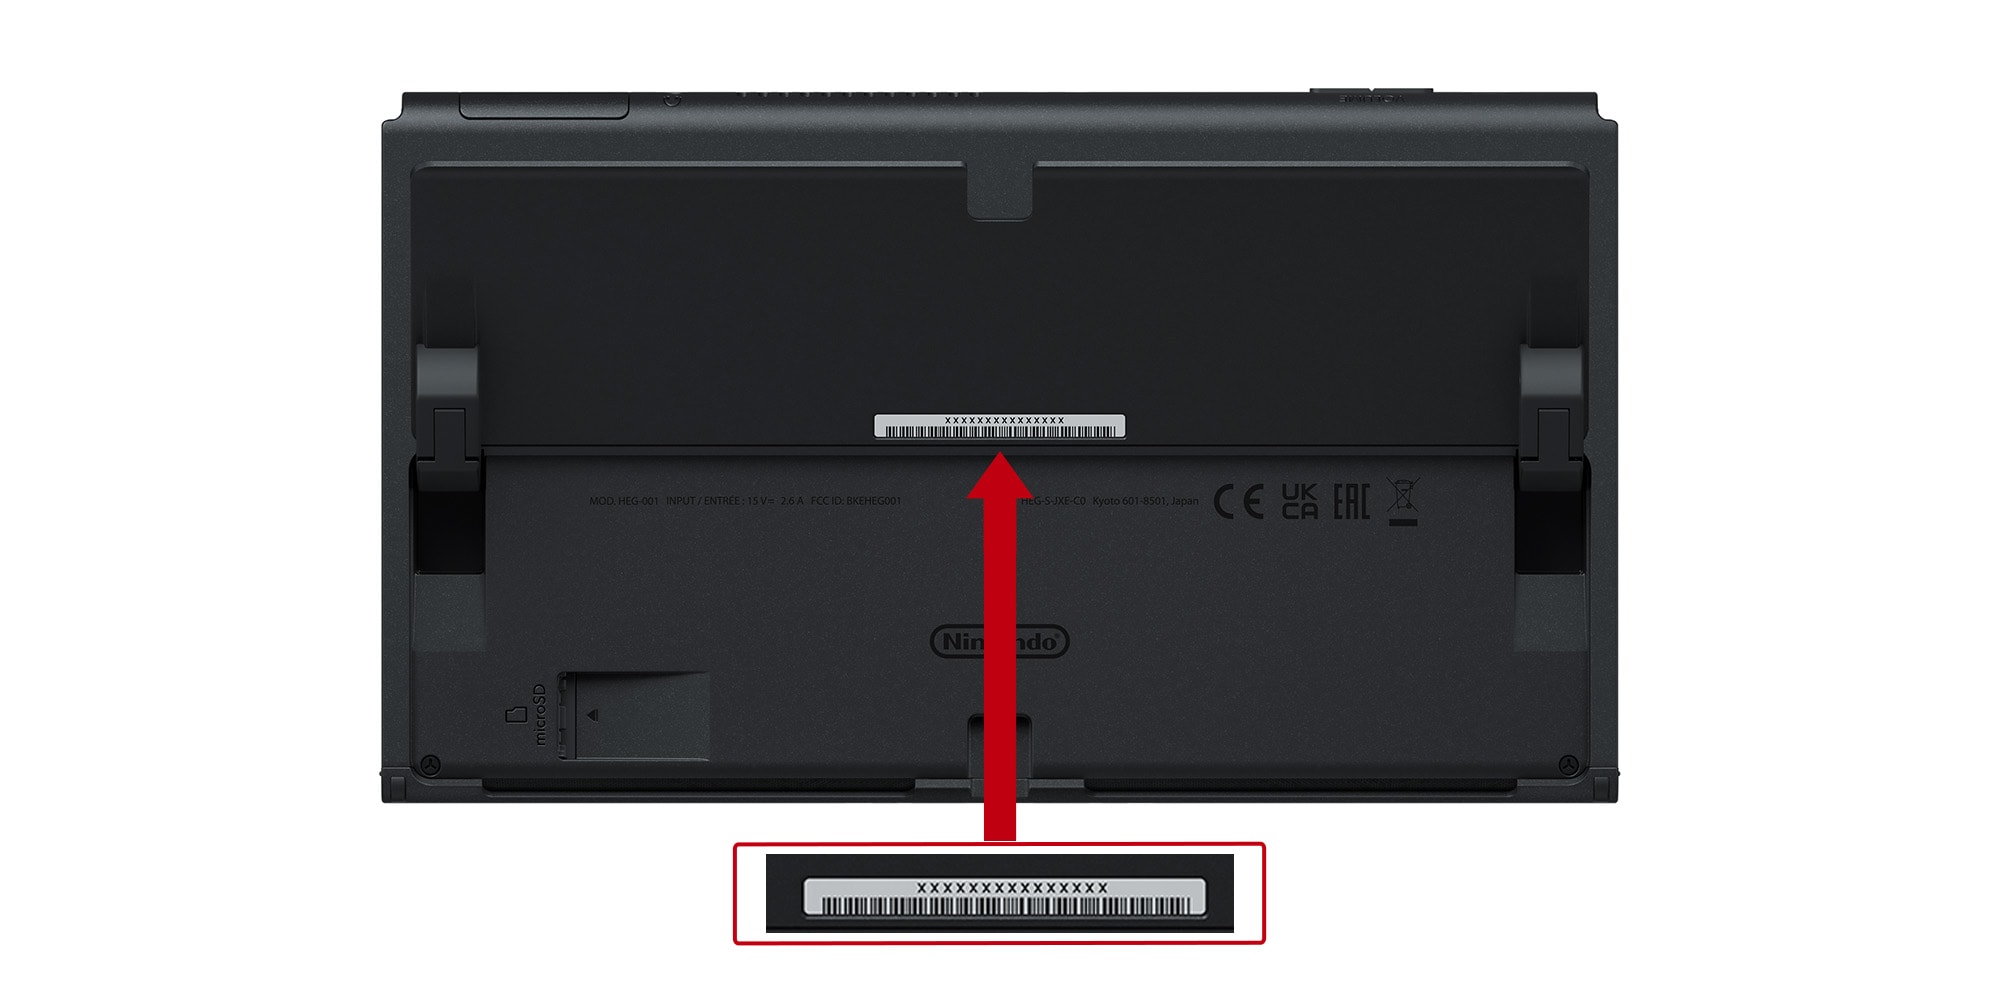 How to Find the Serial Number on Nintendo Switch - Image 4